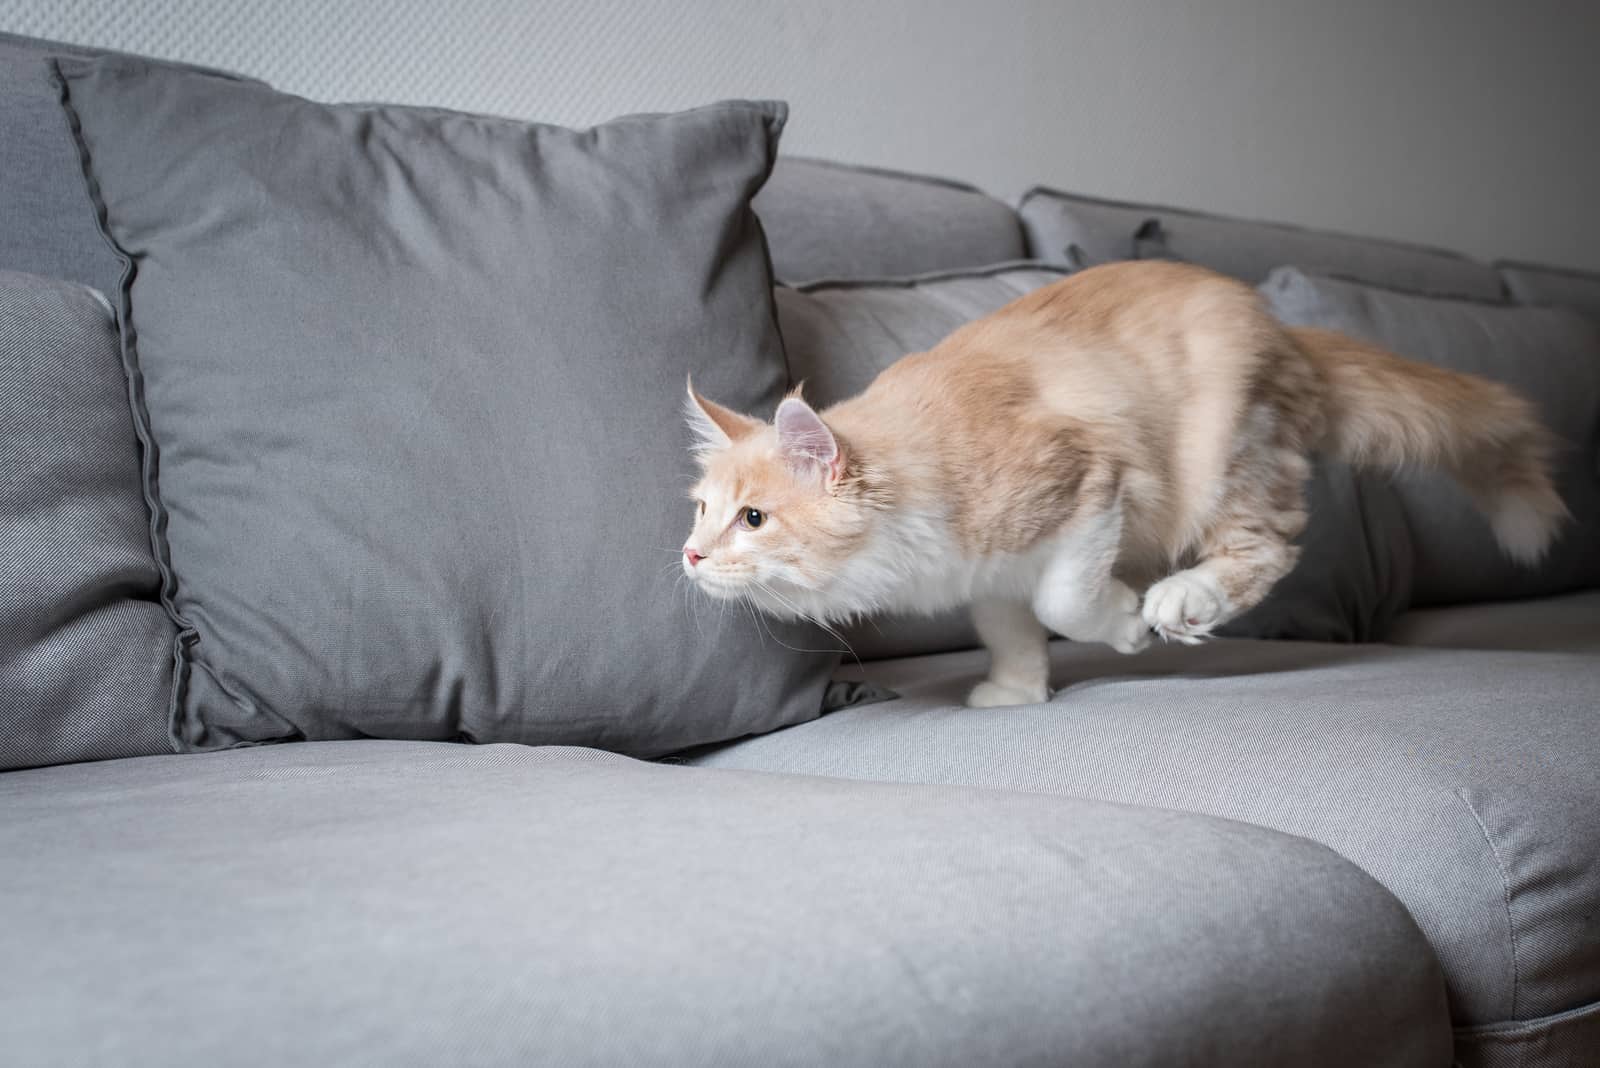 the cat runs away on the couch